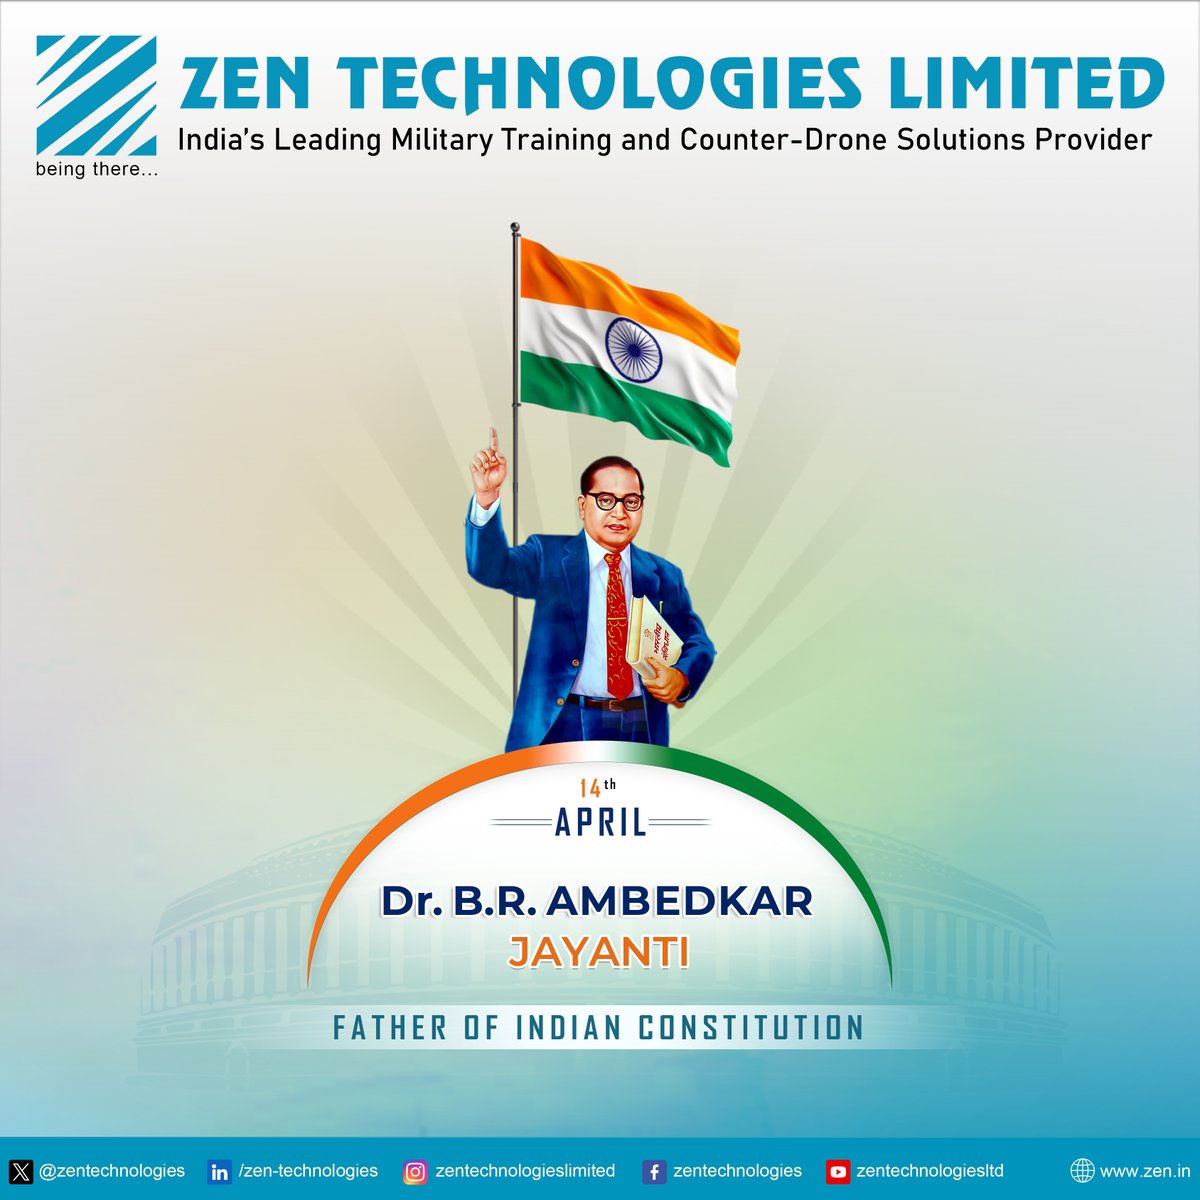 Honoring #AmbedkarJayanti with solemn gratitude. @zentechnologies pays homage to Dr. B.R. Ambedkar, A Stalwart Advocate of #SocialJustice, #Equality, and #HumanRights. Let's emulate his vision for a fairer society and advocate for #BetterTomorrow. 

#IndianConstitution…